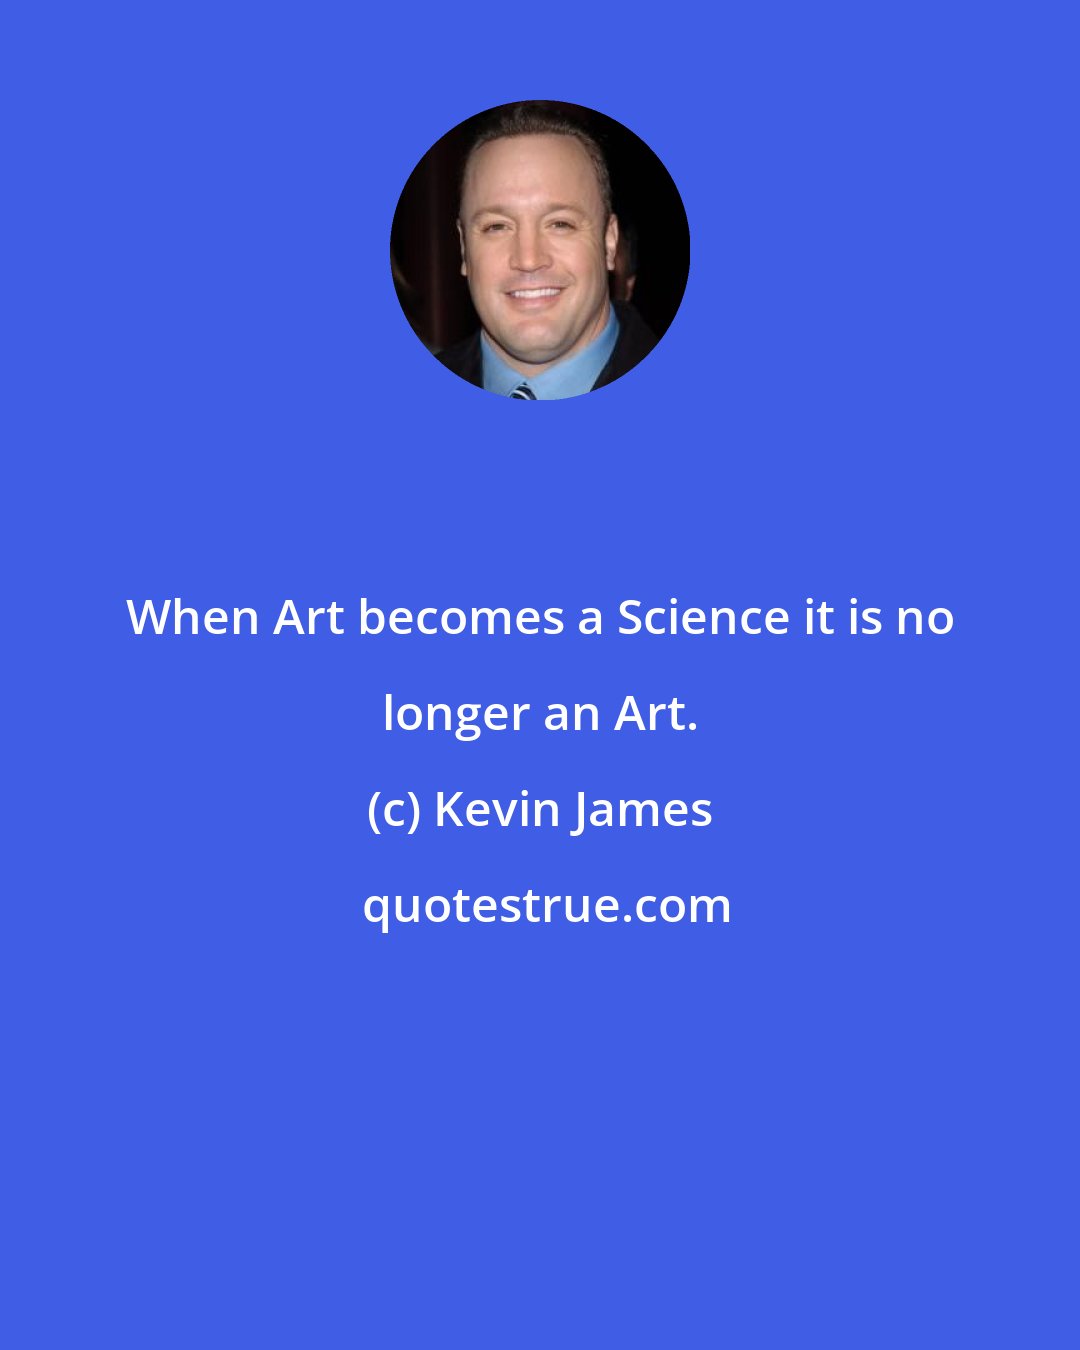 Kevin James: When Art becomes a Science it is no longer an Art.